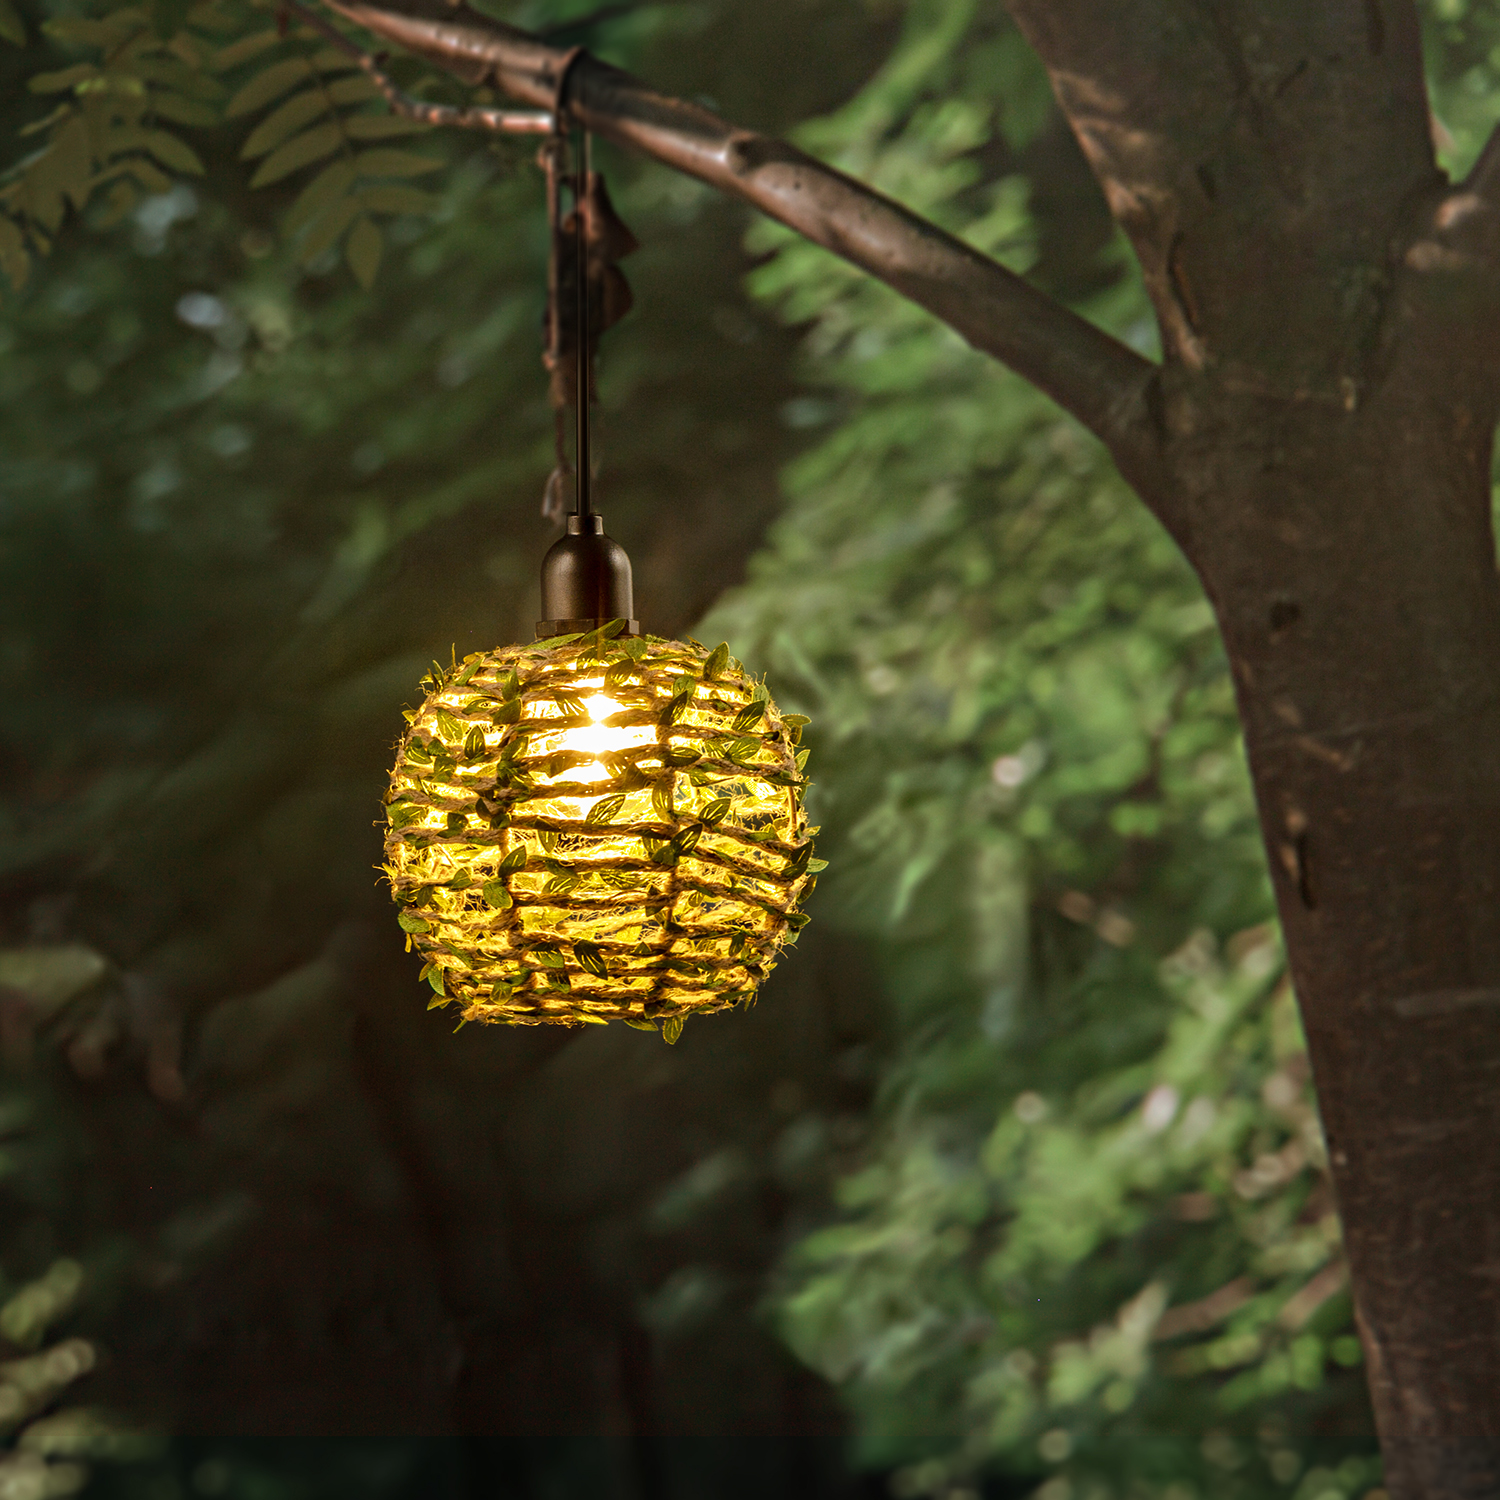 Hanging Pendant Light: A Stylish and Versatile Choice for Your Home